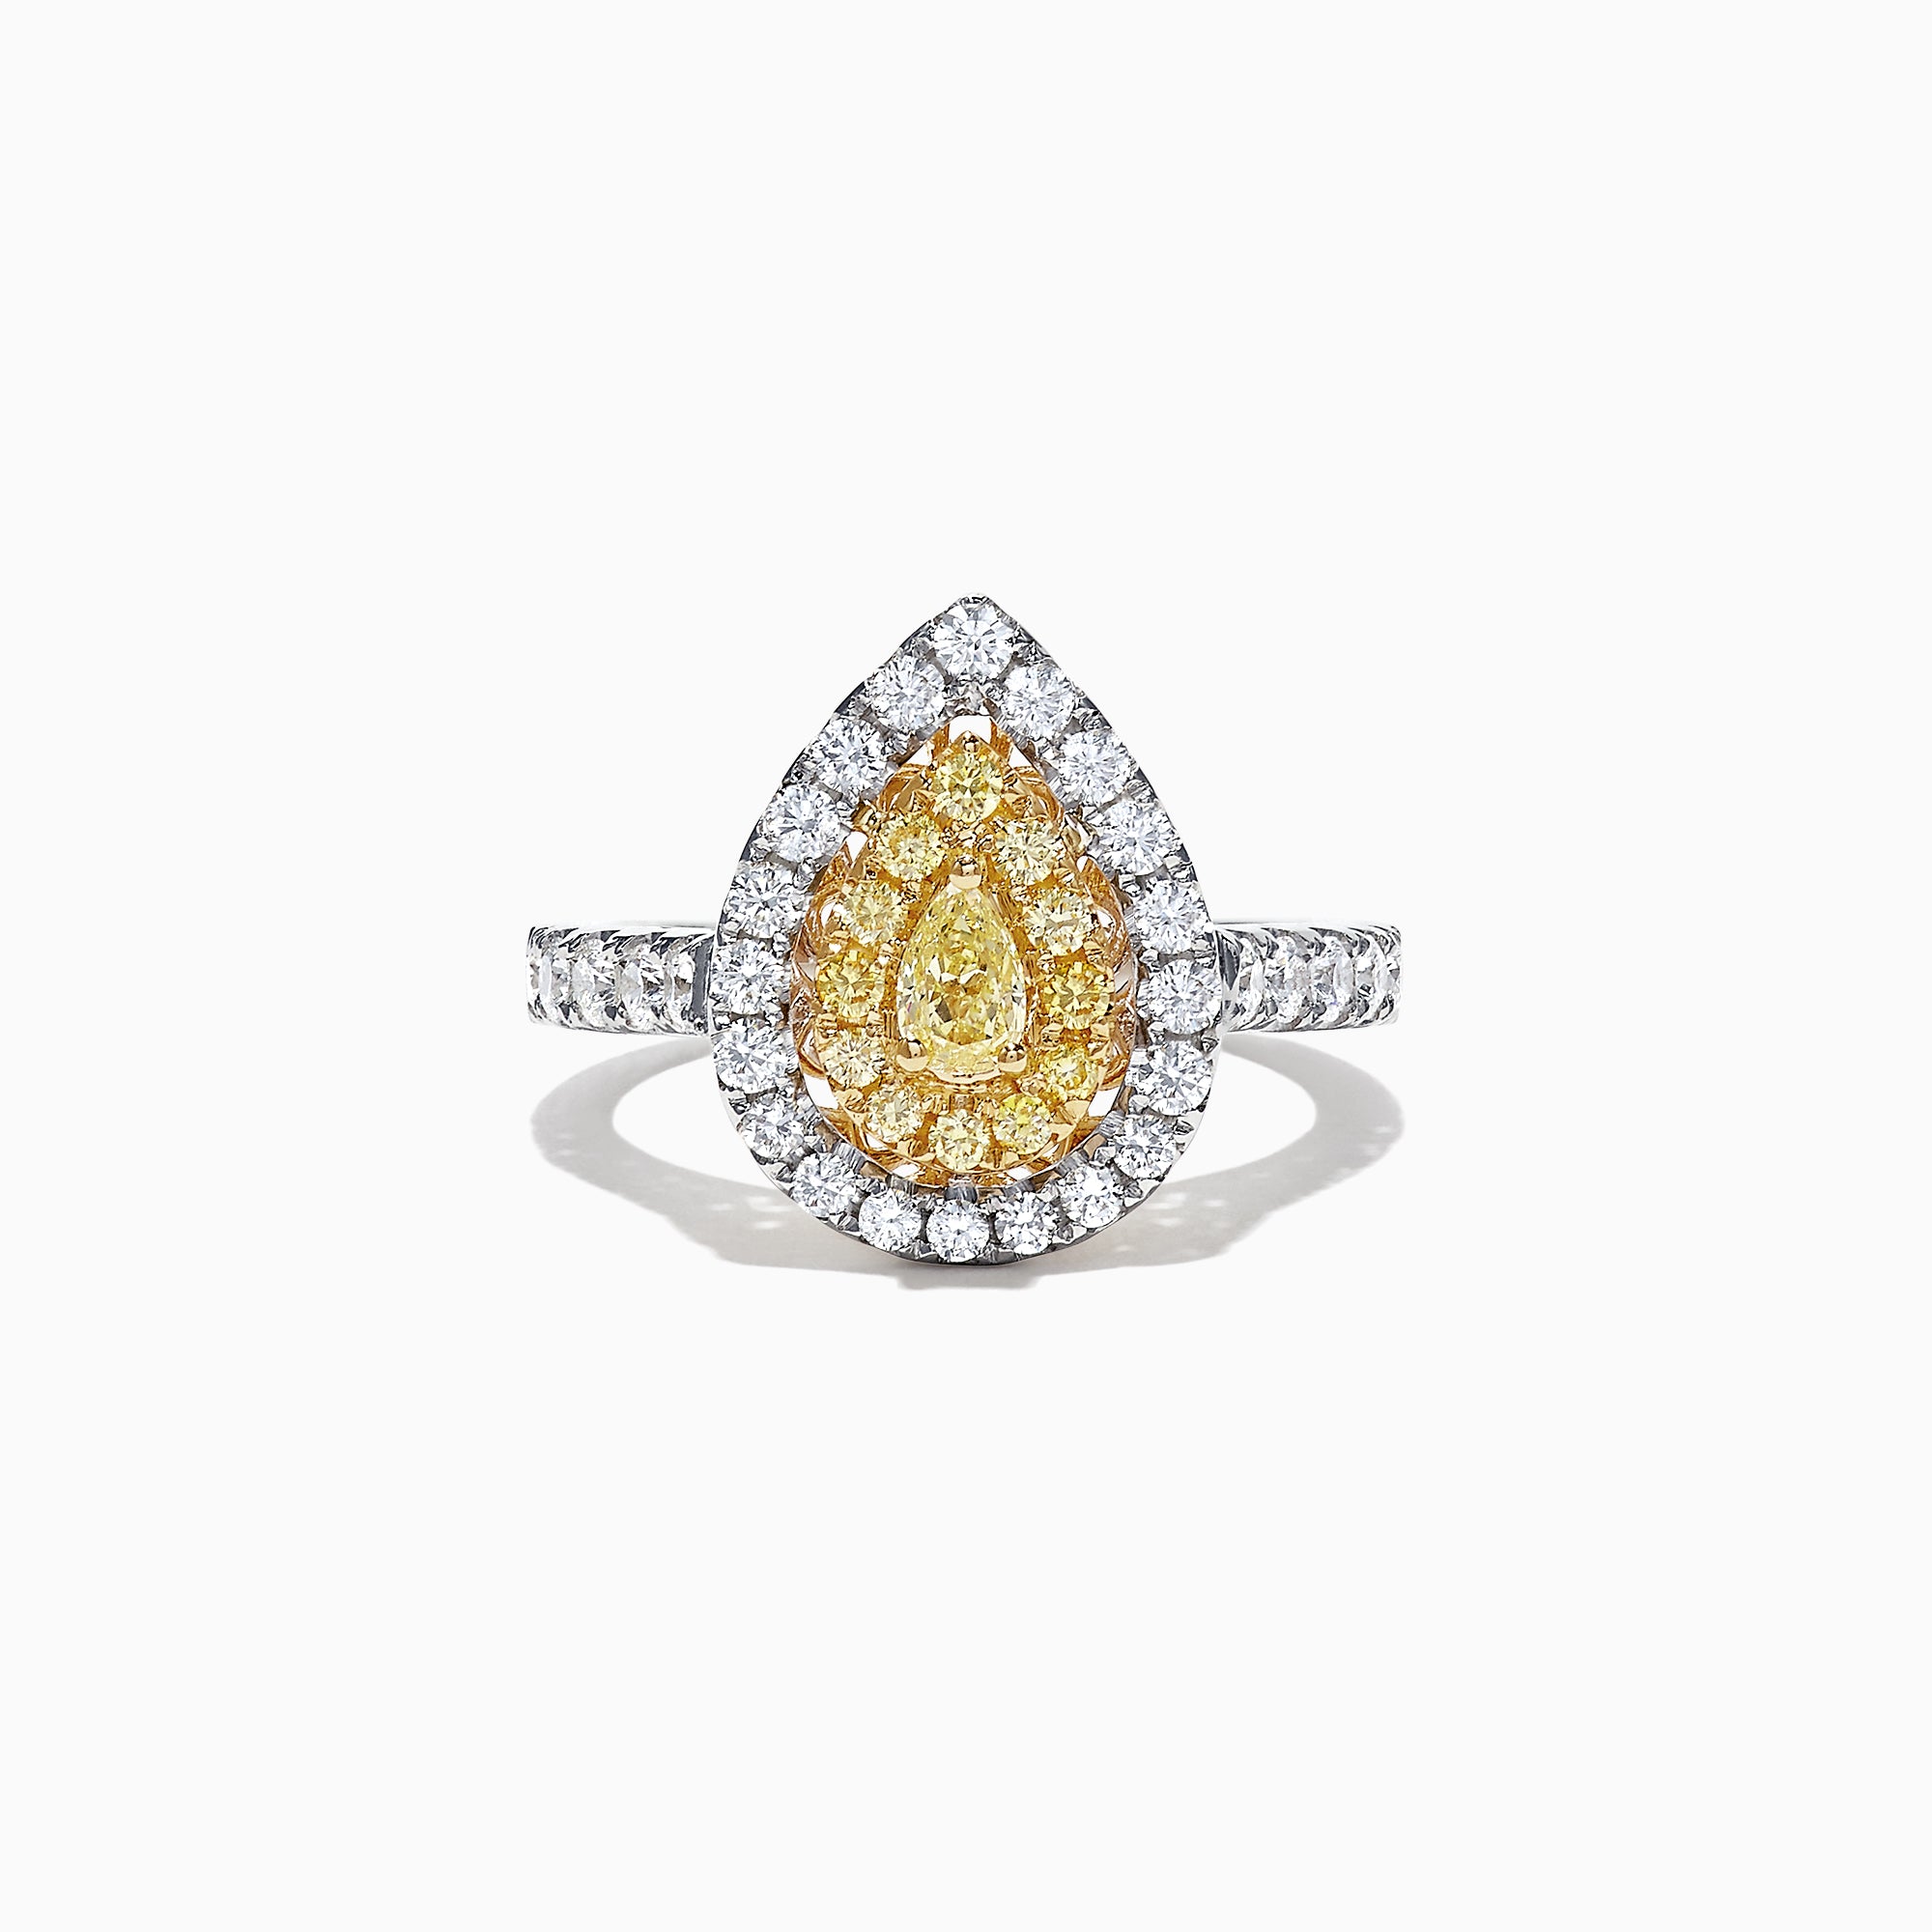 Effy Canare 18K Two-Tone Gold Yellow and White Diamond Ring, 1.21 TCW